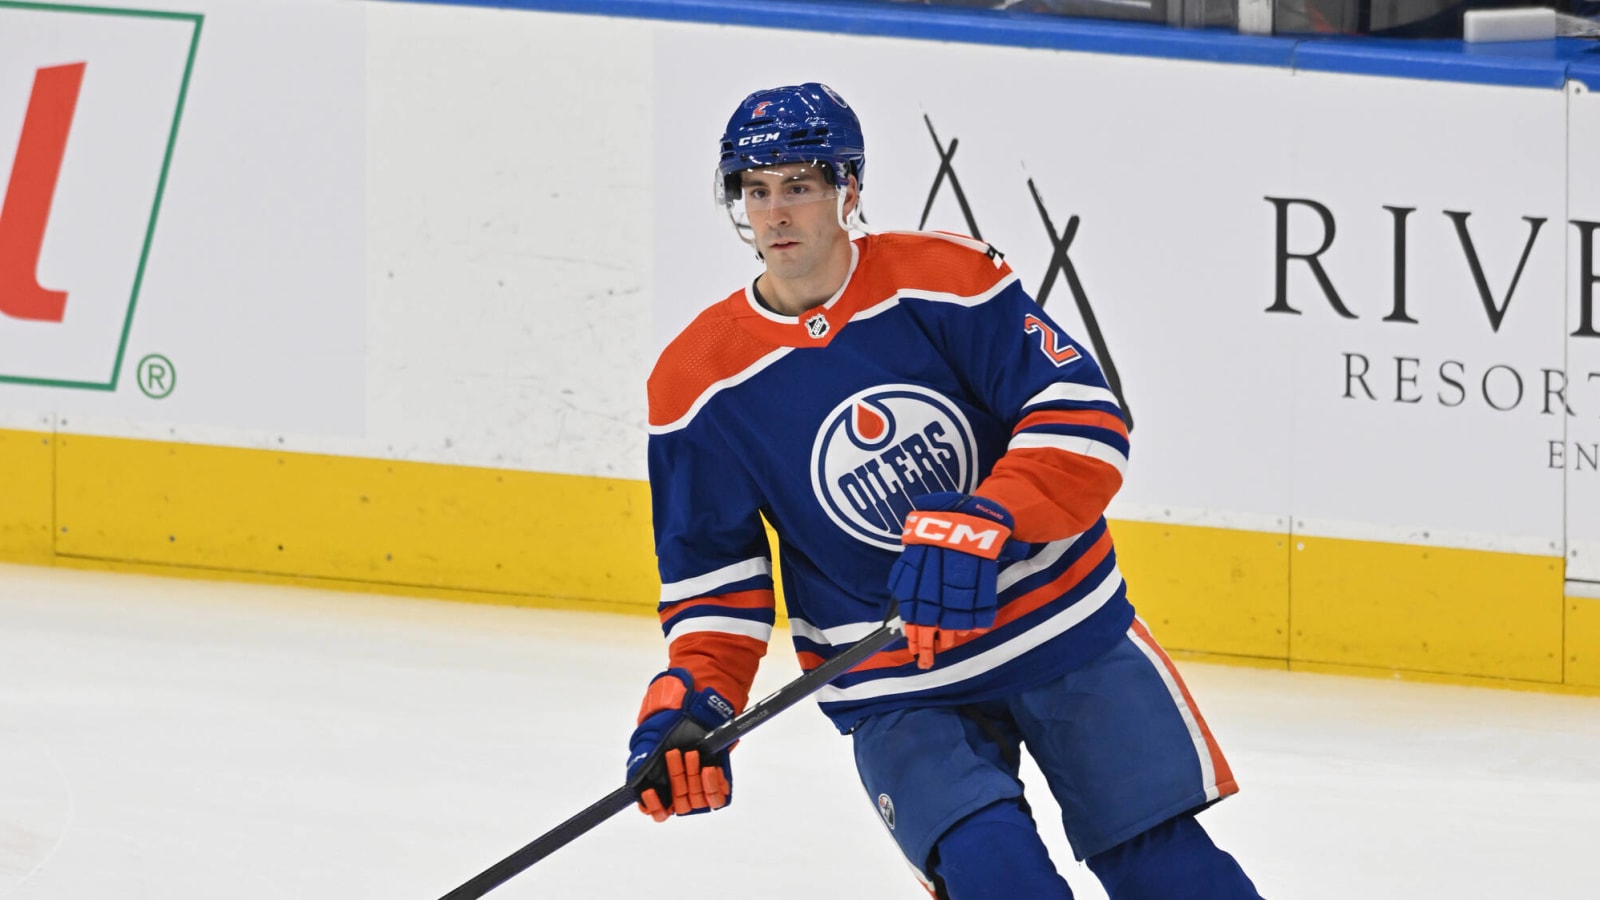 Could See Flurry of Activity for Oilers After Bouchard, McLeod Signed